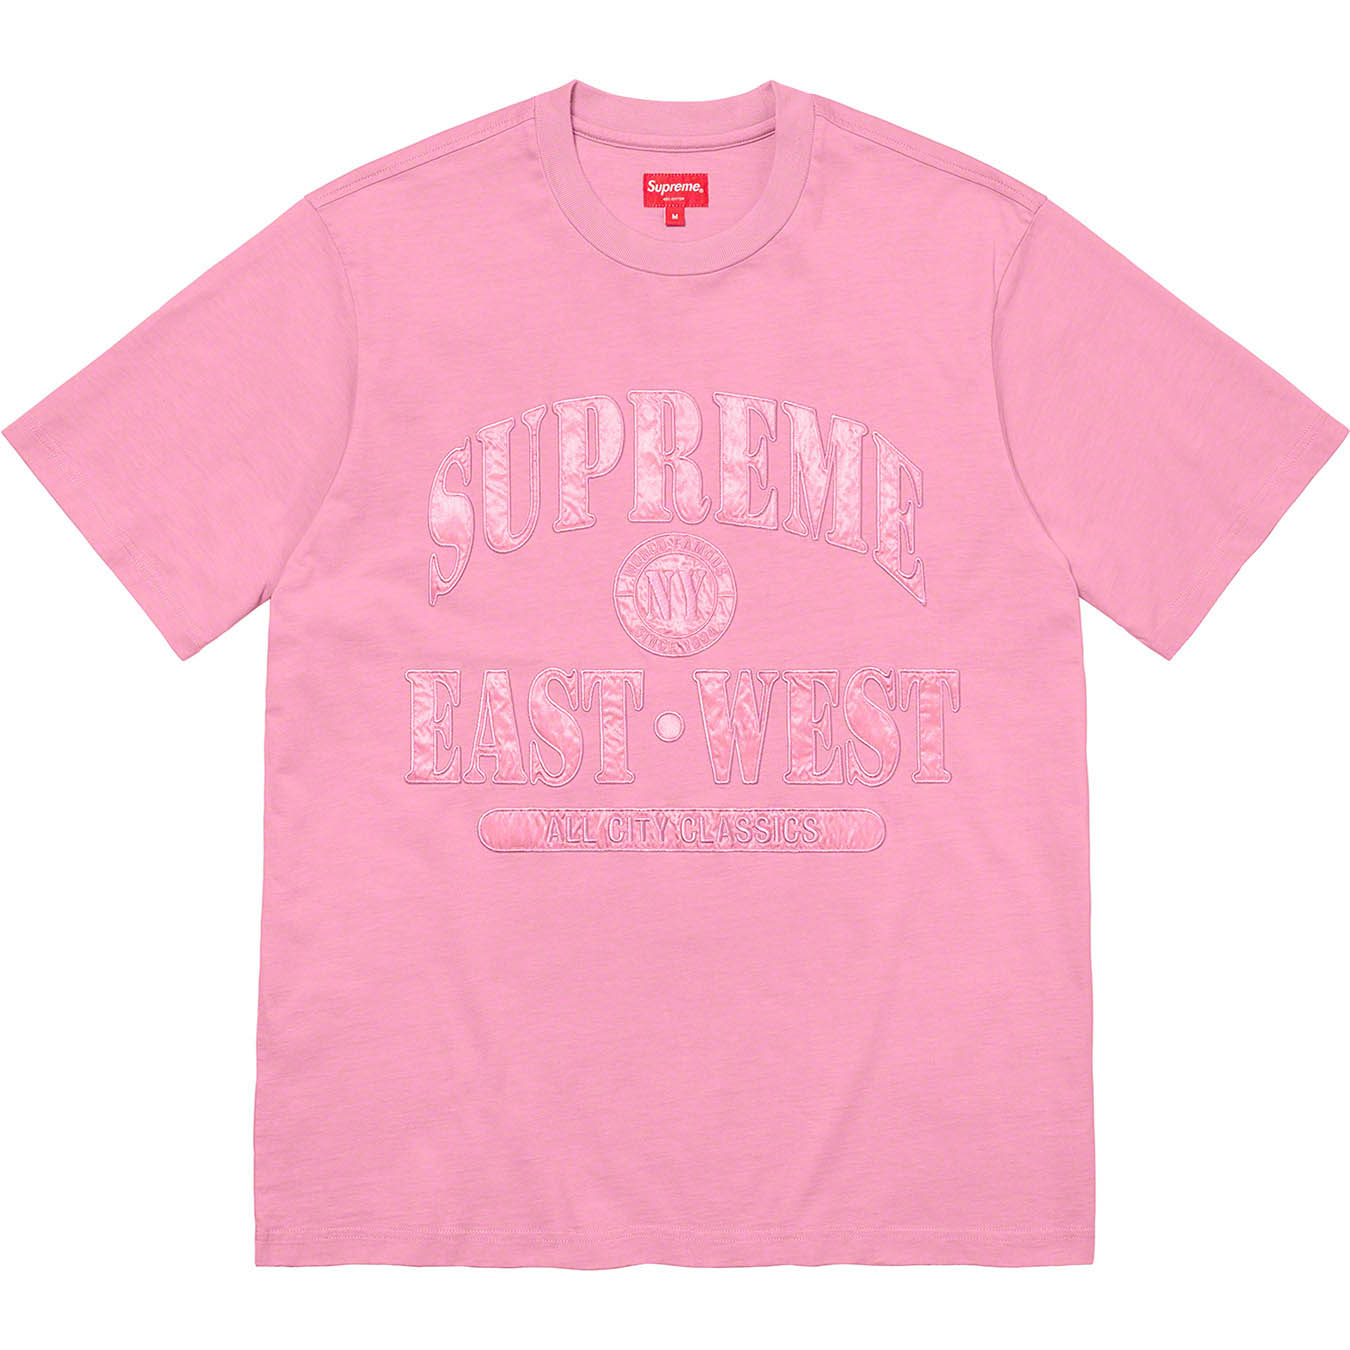 East West S/S Top | Supreme 21fw